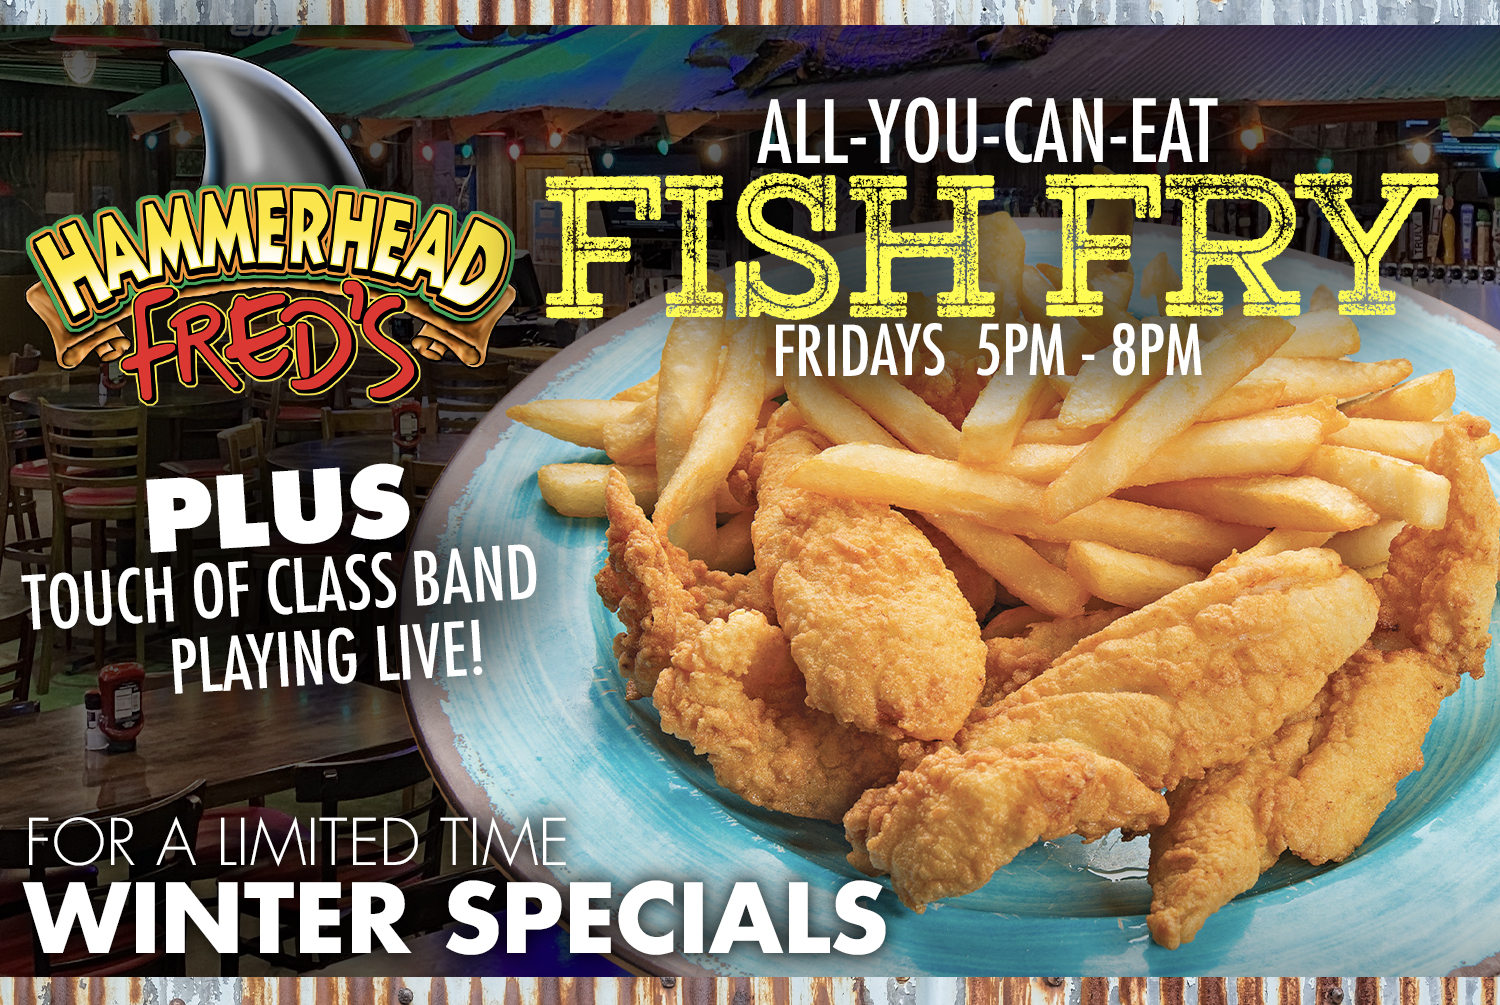 All-You-Can-Eat Fish Fry - Hammerhead Fred's